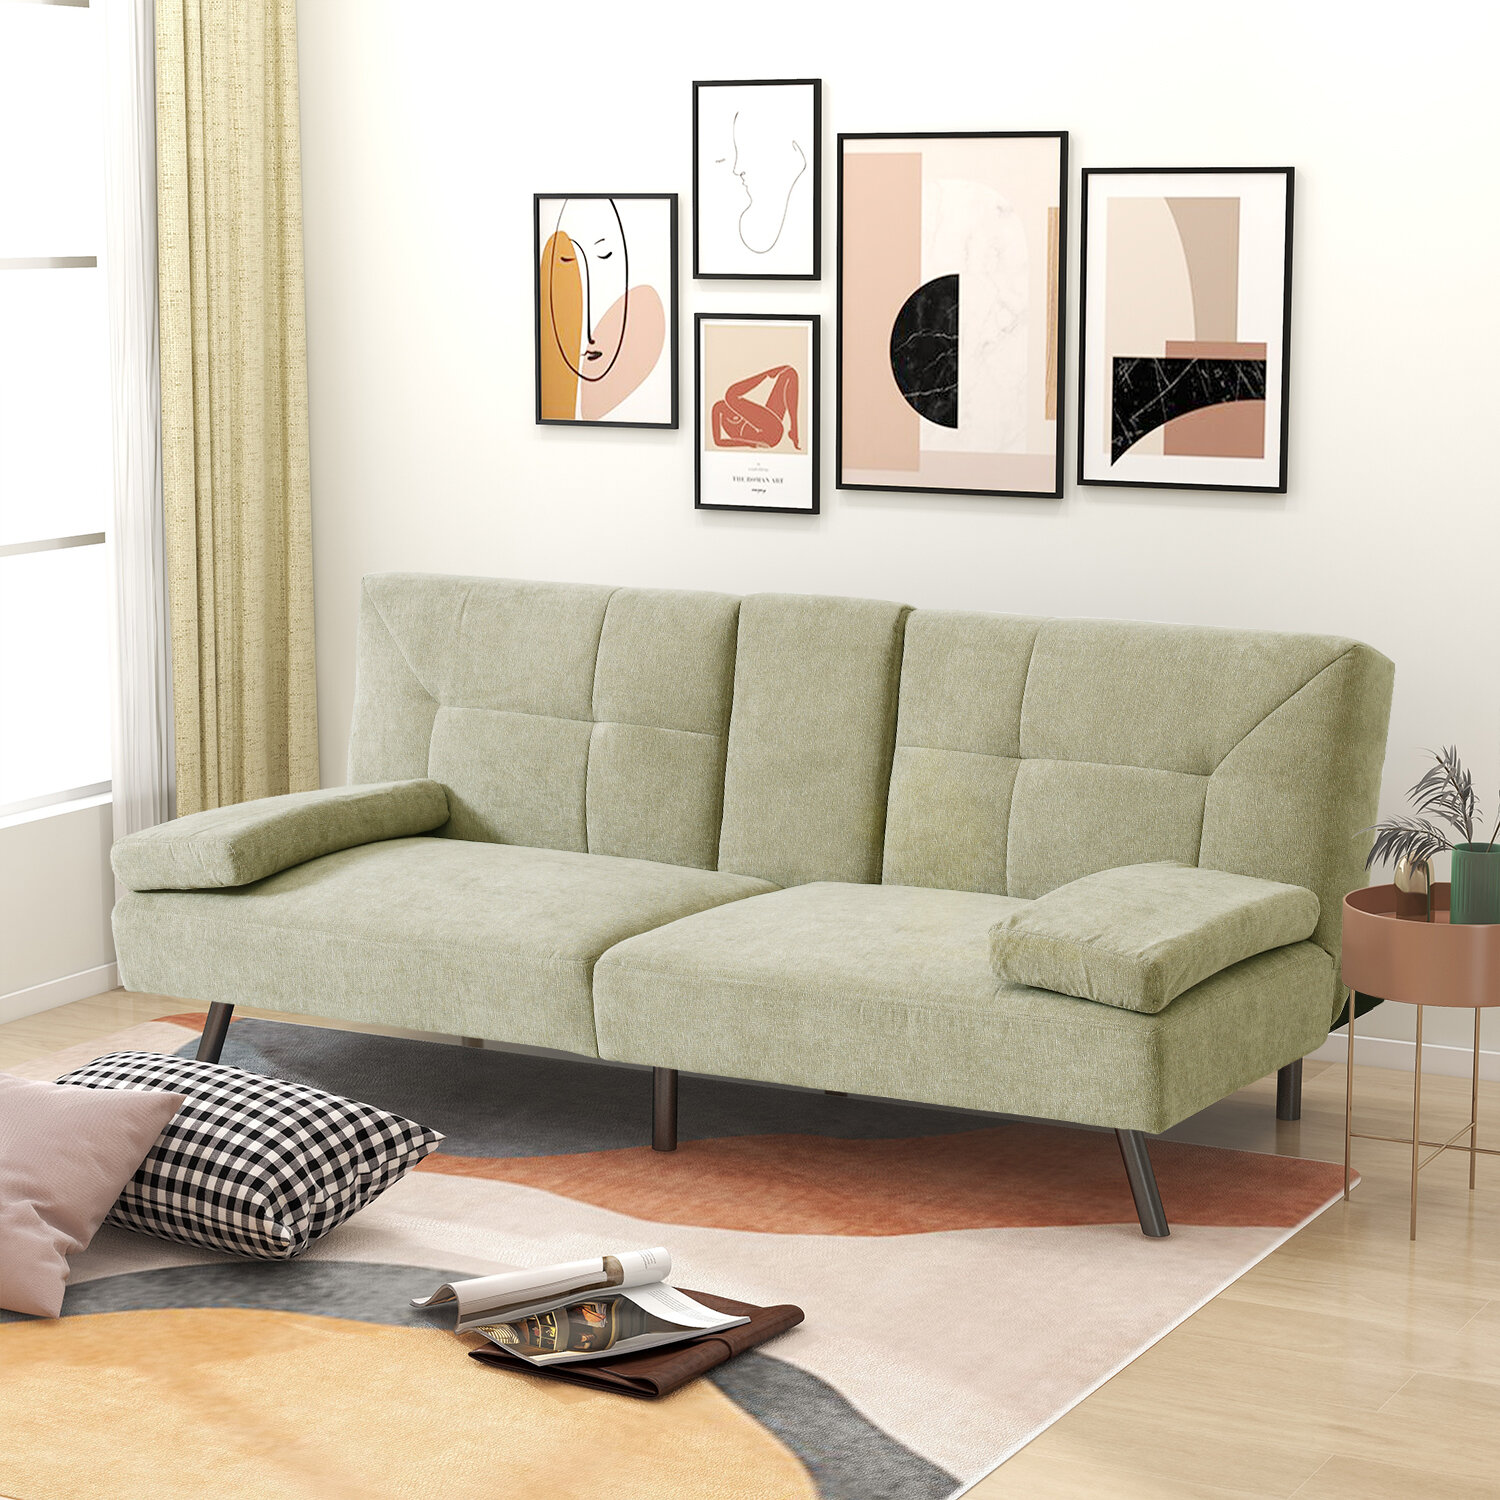 Futon Sofa Bed Frame Materials: Exploring Durability, Style, And Maintenance  